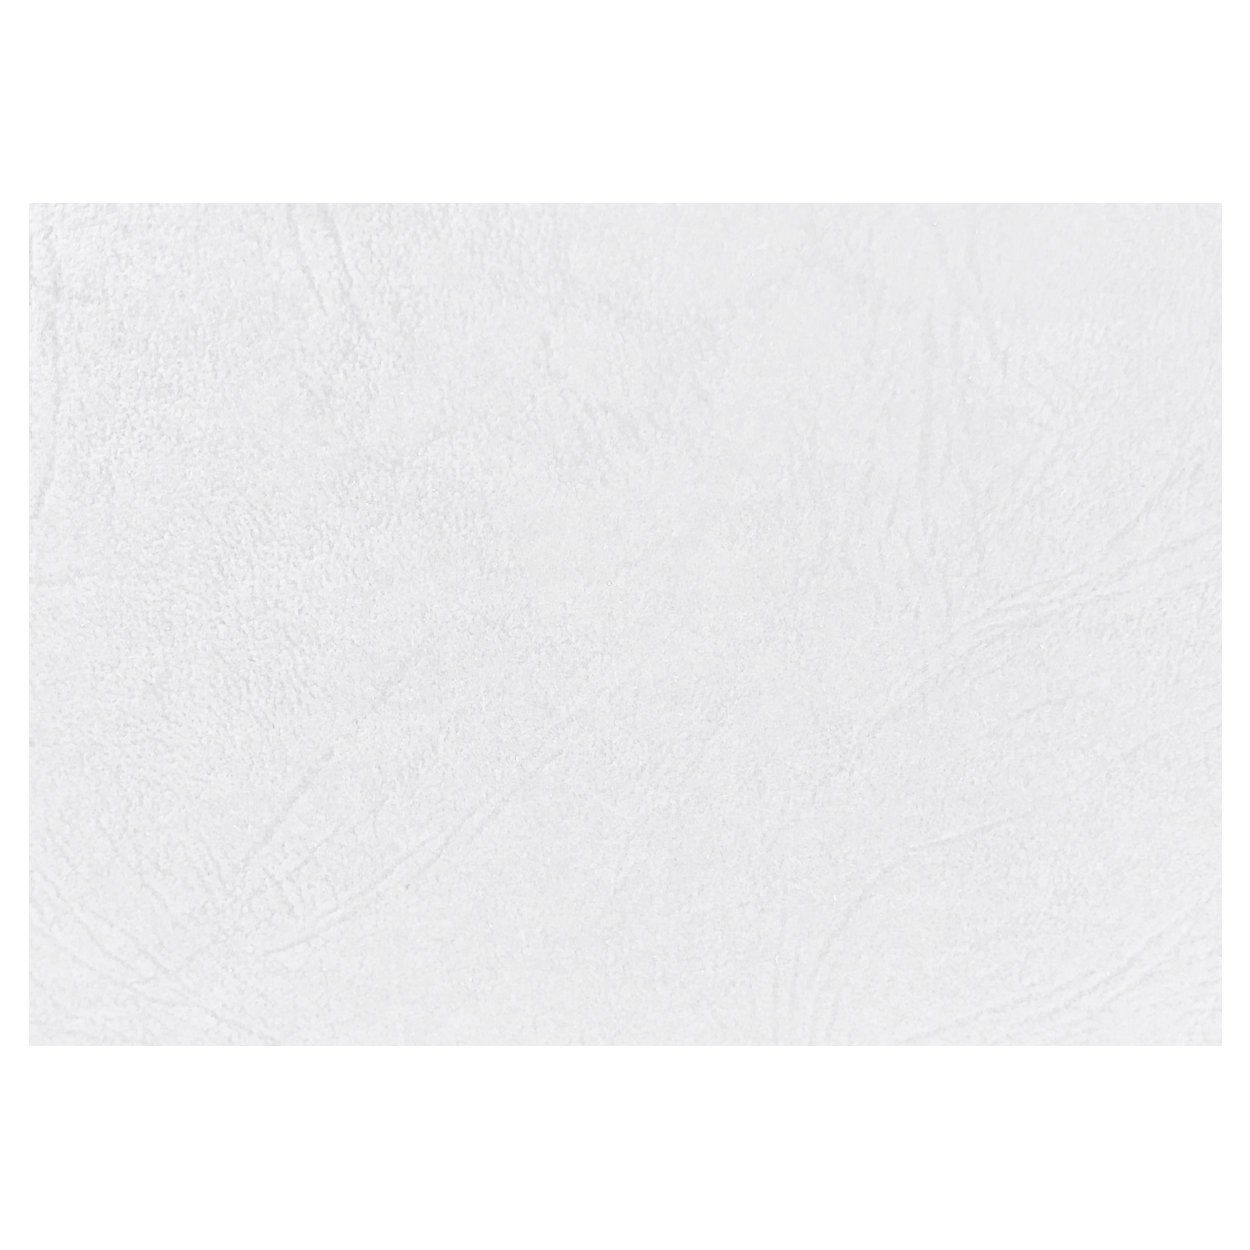 A3 White Leather Grain Covers (Pkt 100) - Click Image to Close